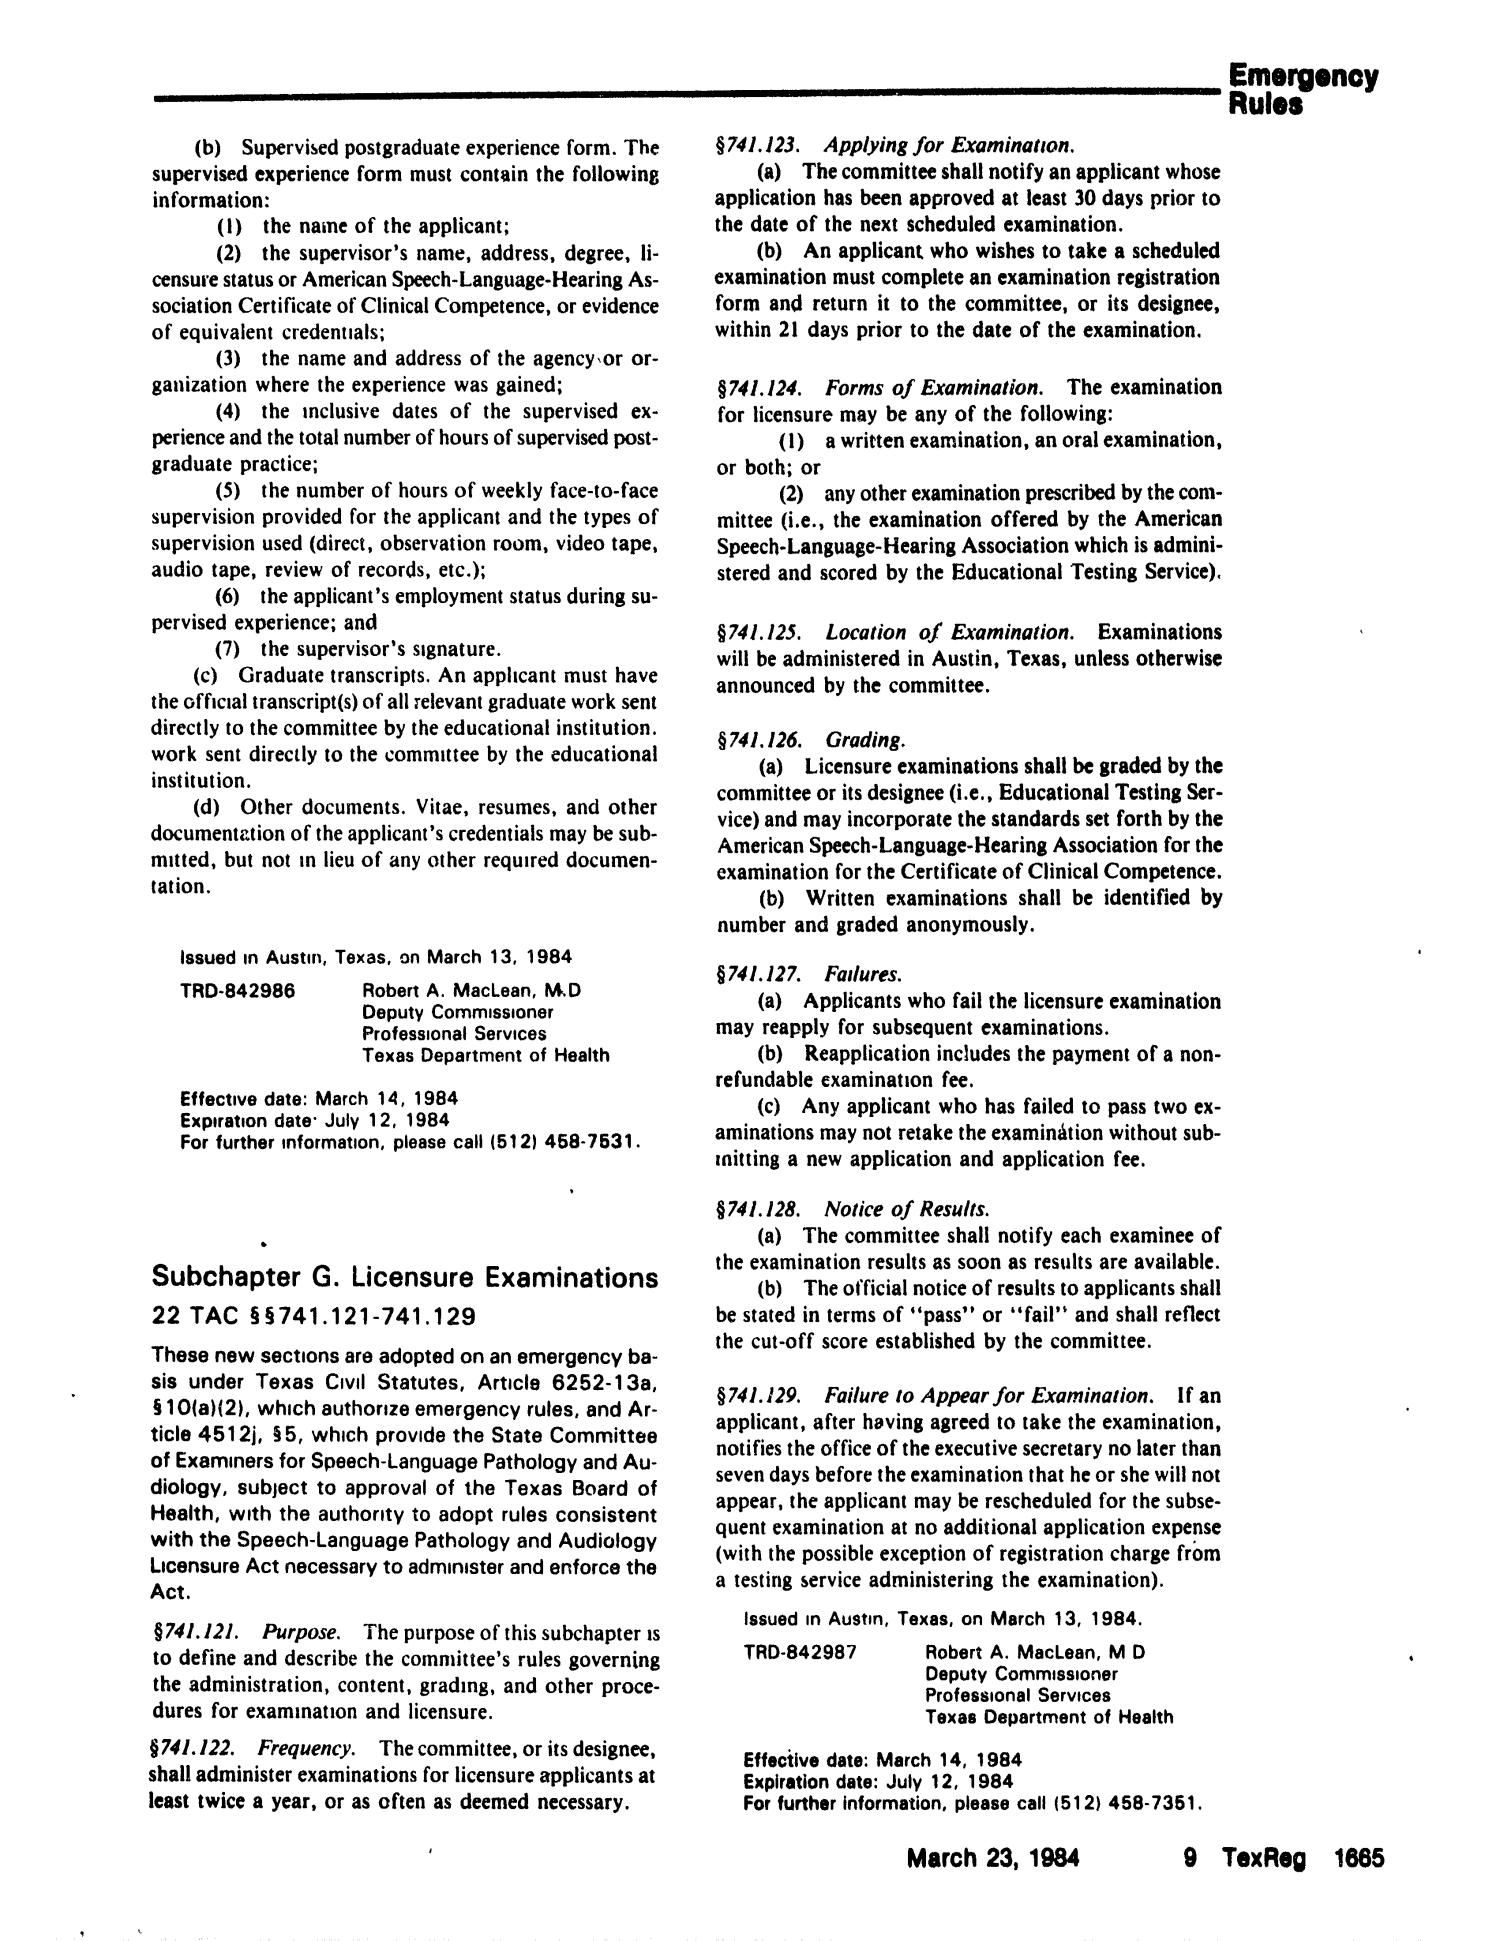 Texas Register, Volume 9, Number 22, Pages 1649-1724, March 23, 1984
                                                
                                                    1665
                                                